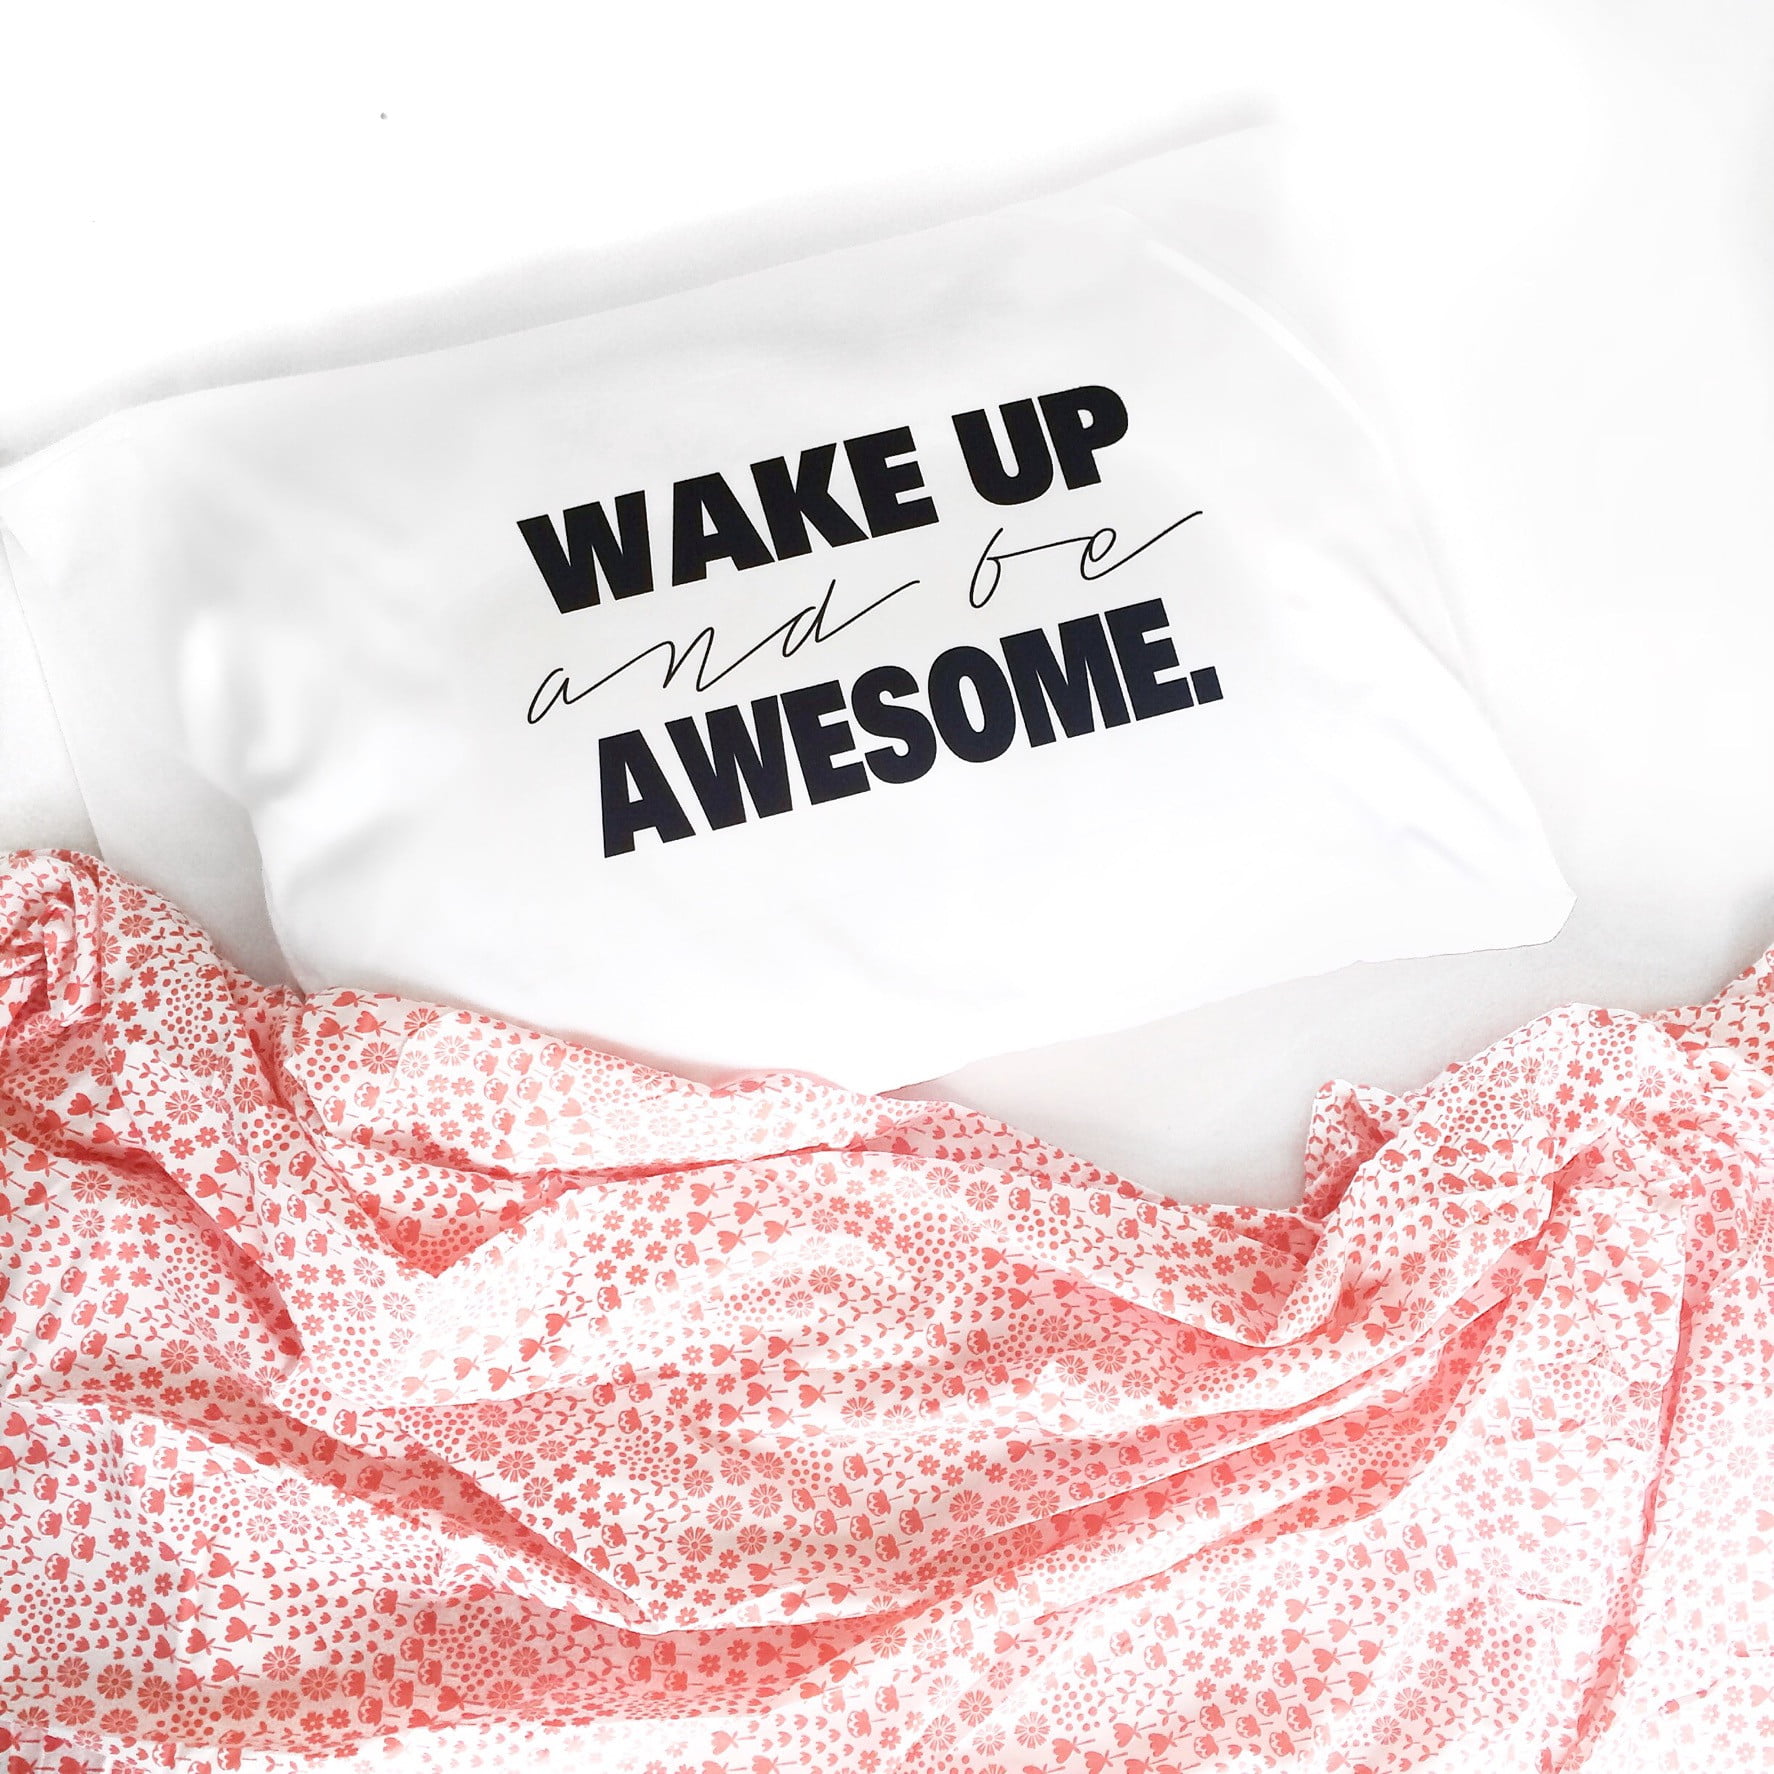 Wake Up and Be AwesomeTM Standard Pillow Cover (20x30